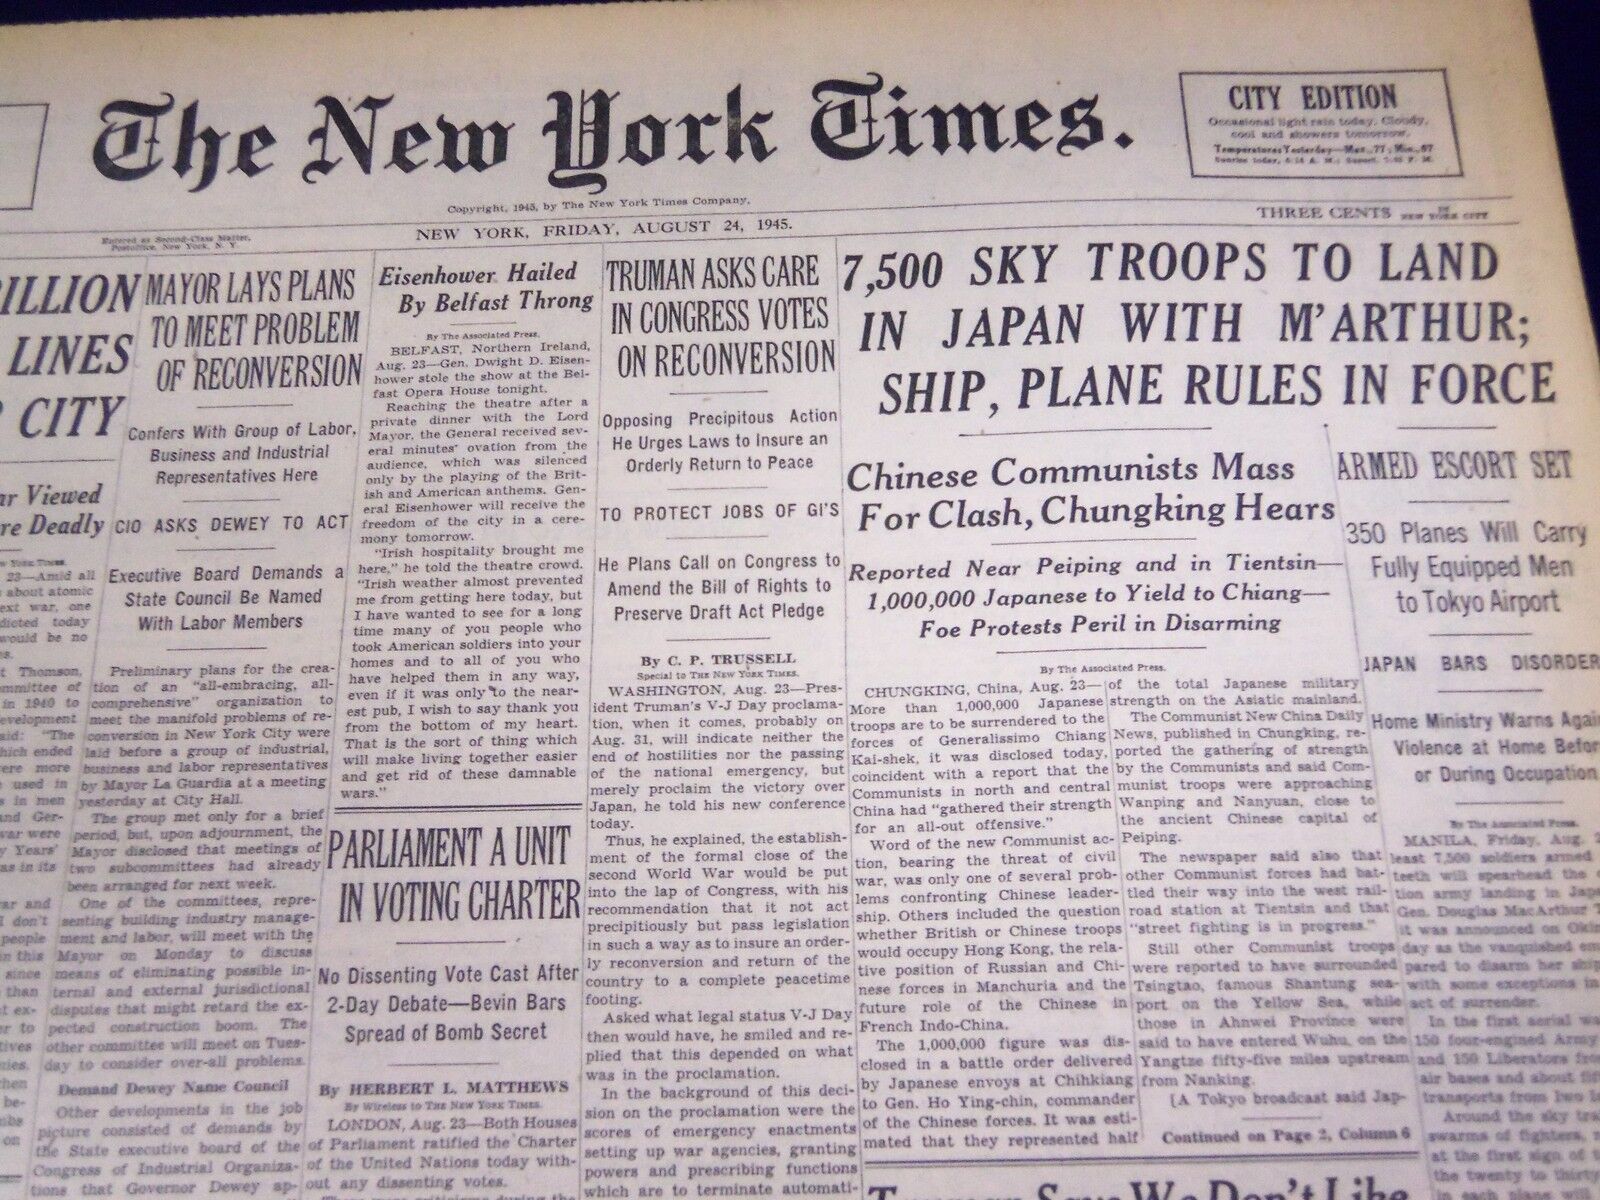 1945 AUG 24 NEW YORK TIMES - 7,500 SKY TROOPS TO LAND IN JAPAN M\'ARTHUR - NT 507